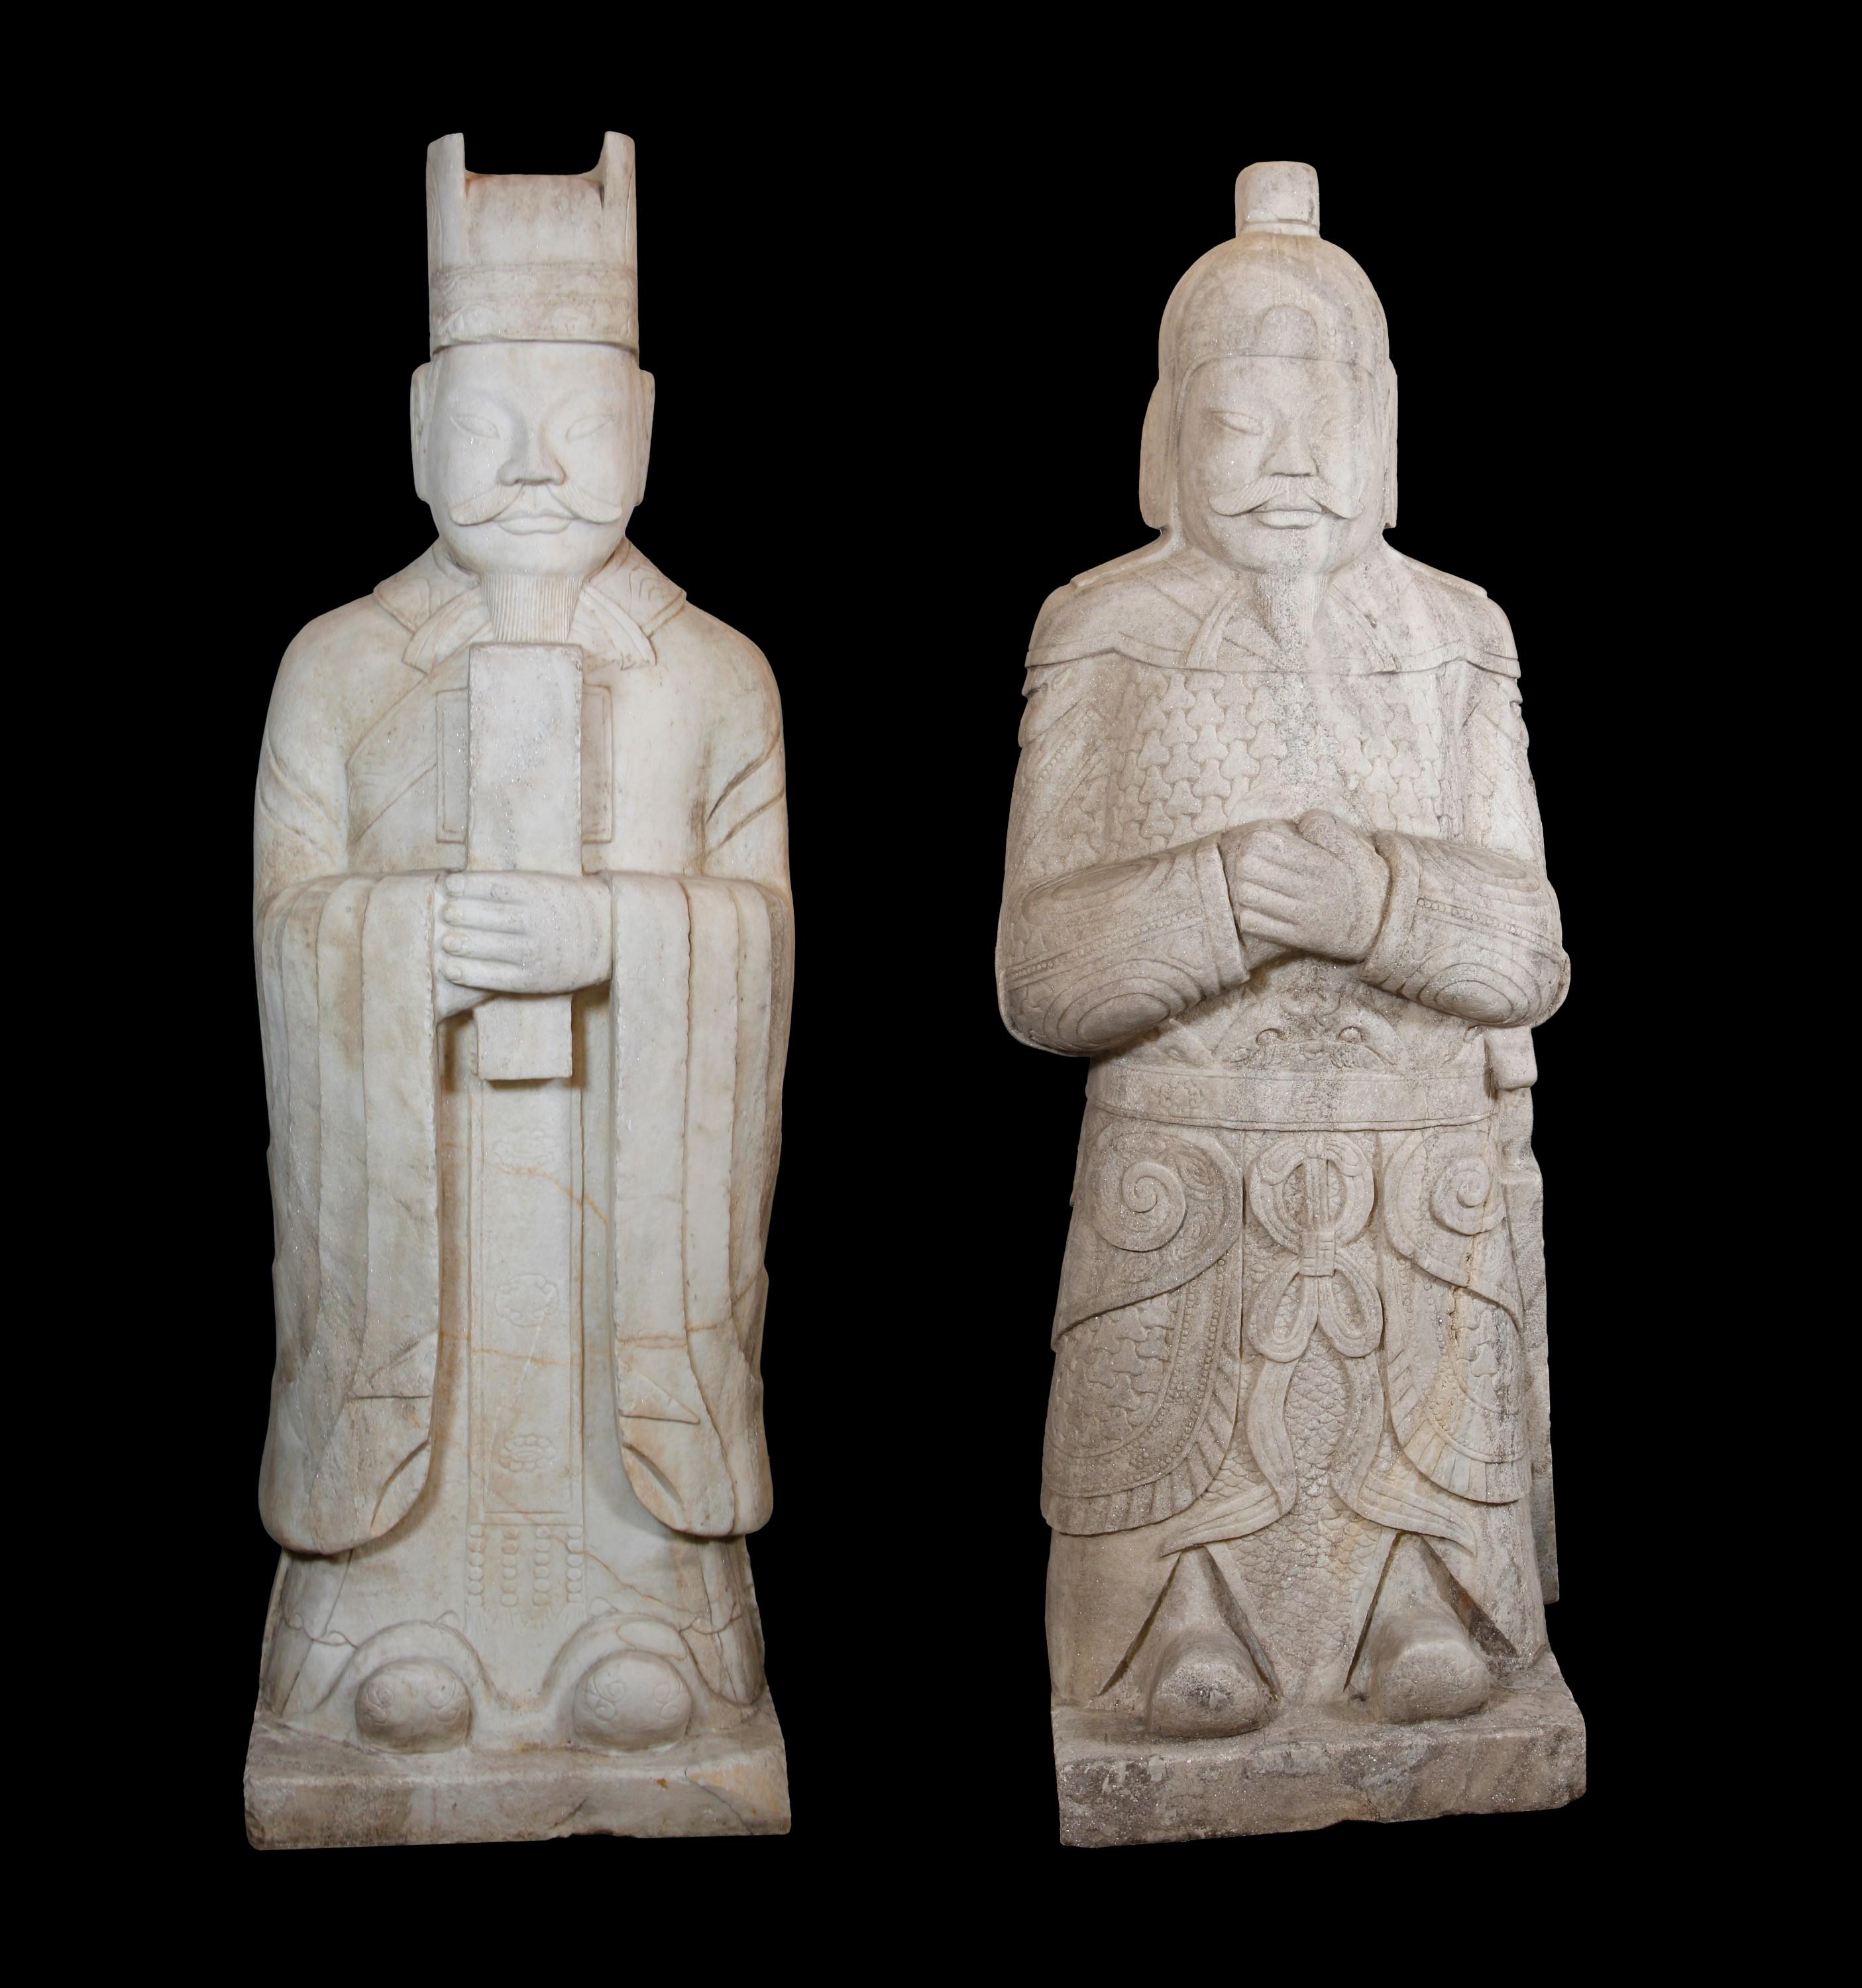 These statues are commonly referred to as Wengzhong. They are so named after a mythological Ruan Weng Zhong who was a highly regarded general during the Qin Shi Huang period. Ruan is said to distinguished himself in fighting their arch rival; the